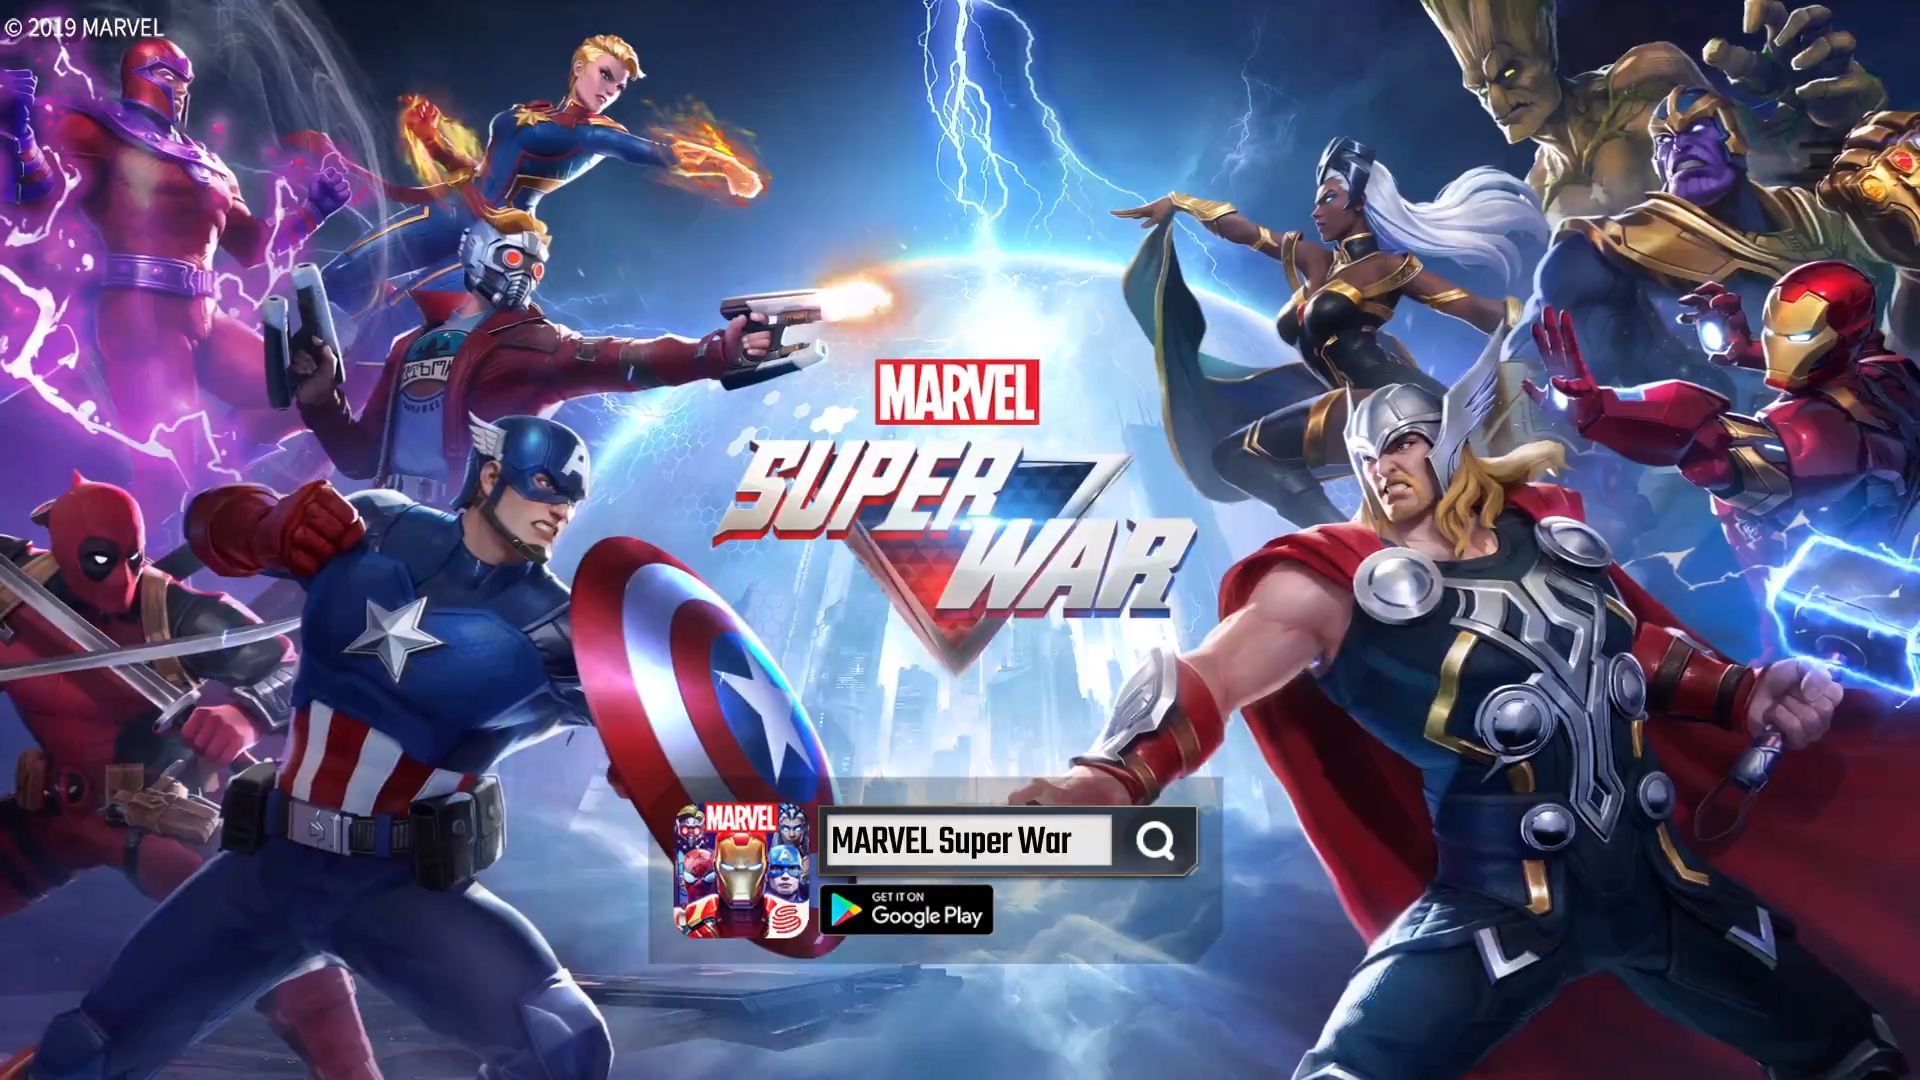 MARVEL SUPER WAR Mobile MOBA Announced with Showing Gameplay